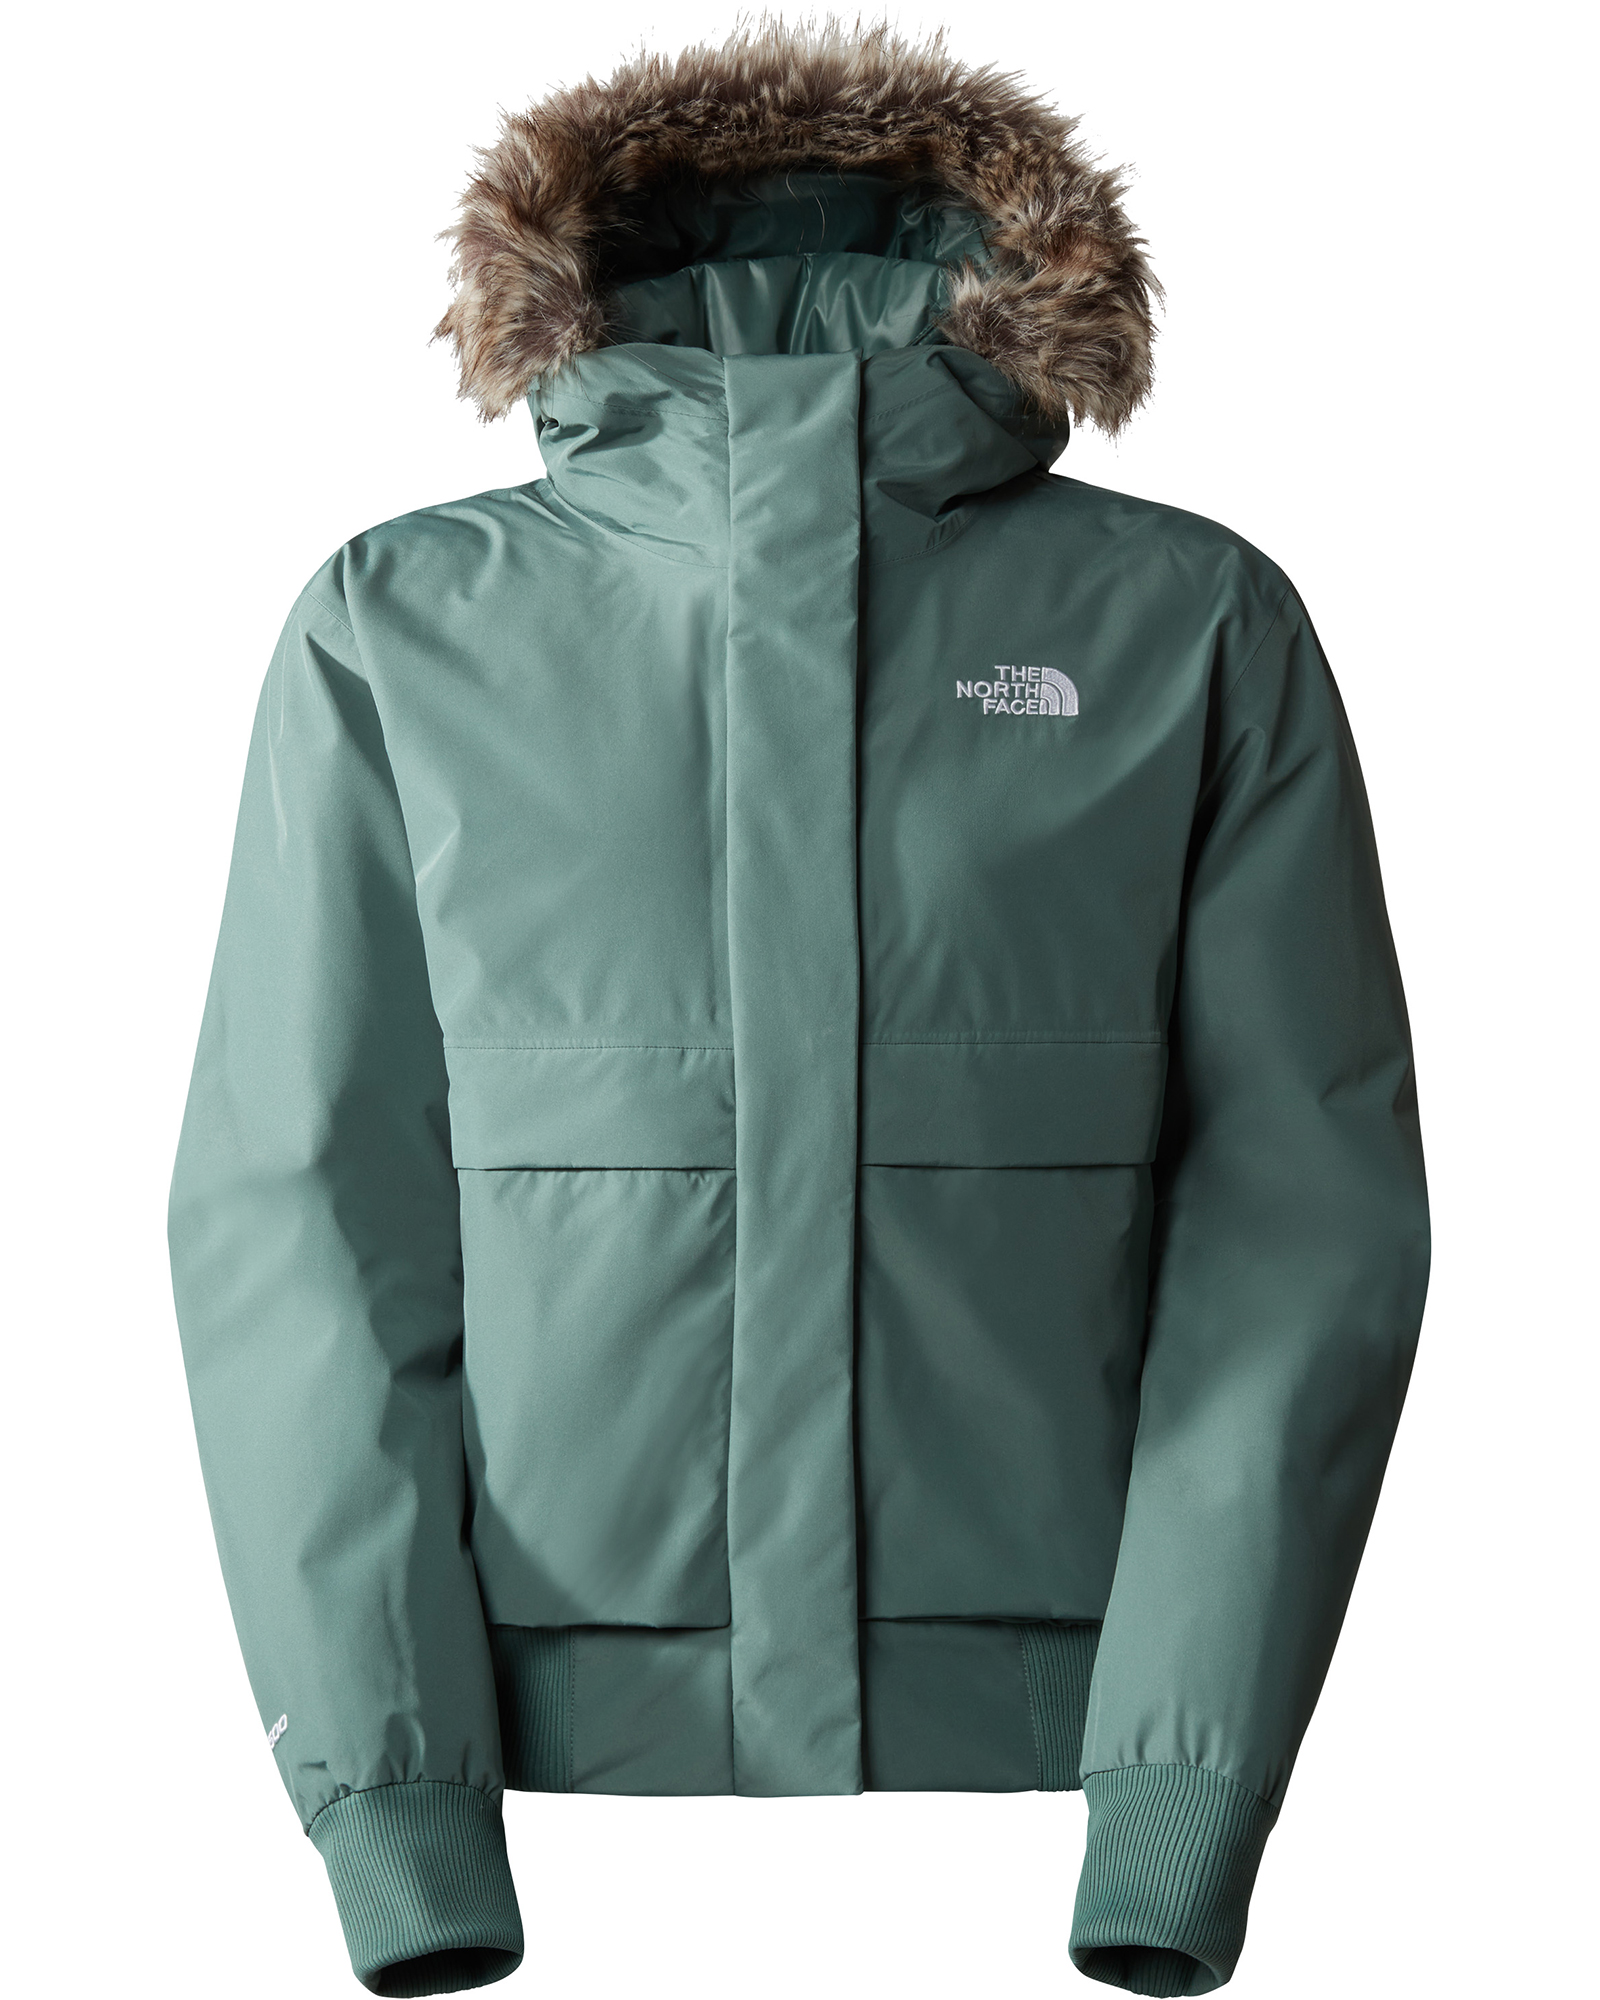 The North Face Women’s Arctic Bomber Down Jacket - Dark Sage S